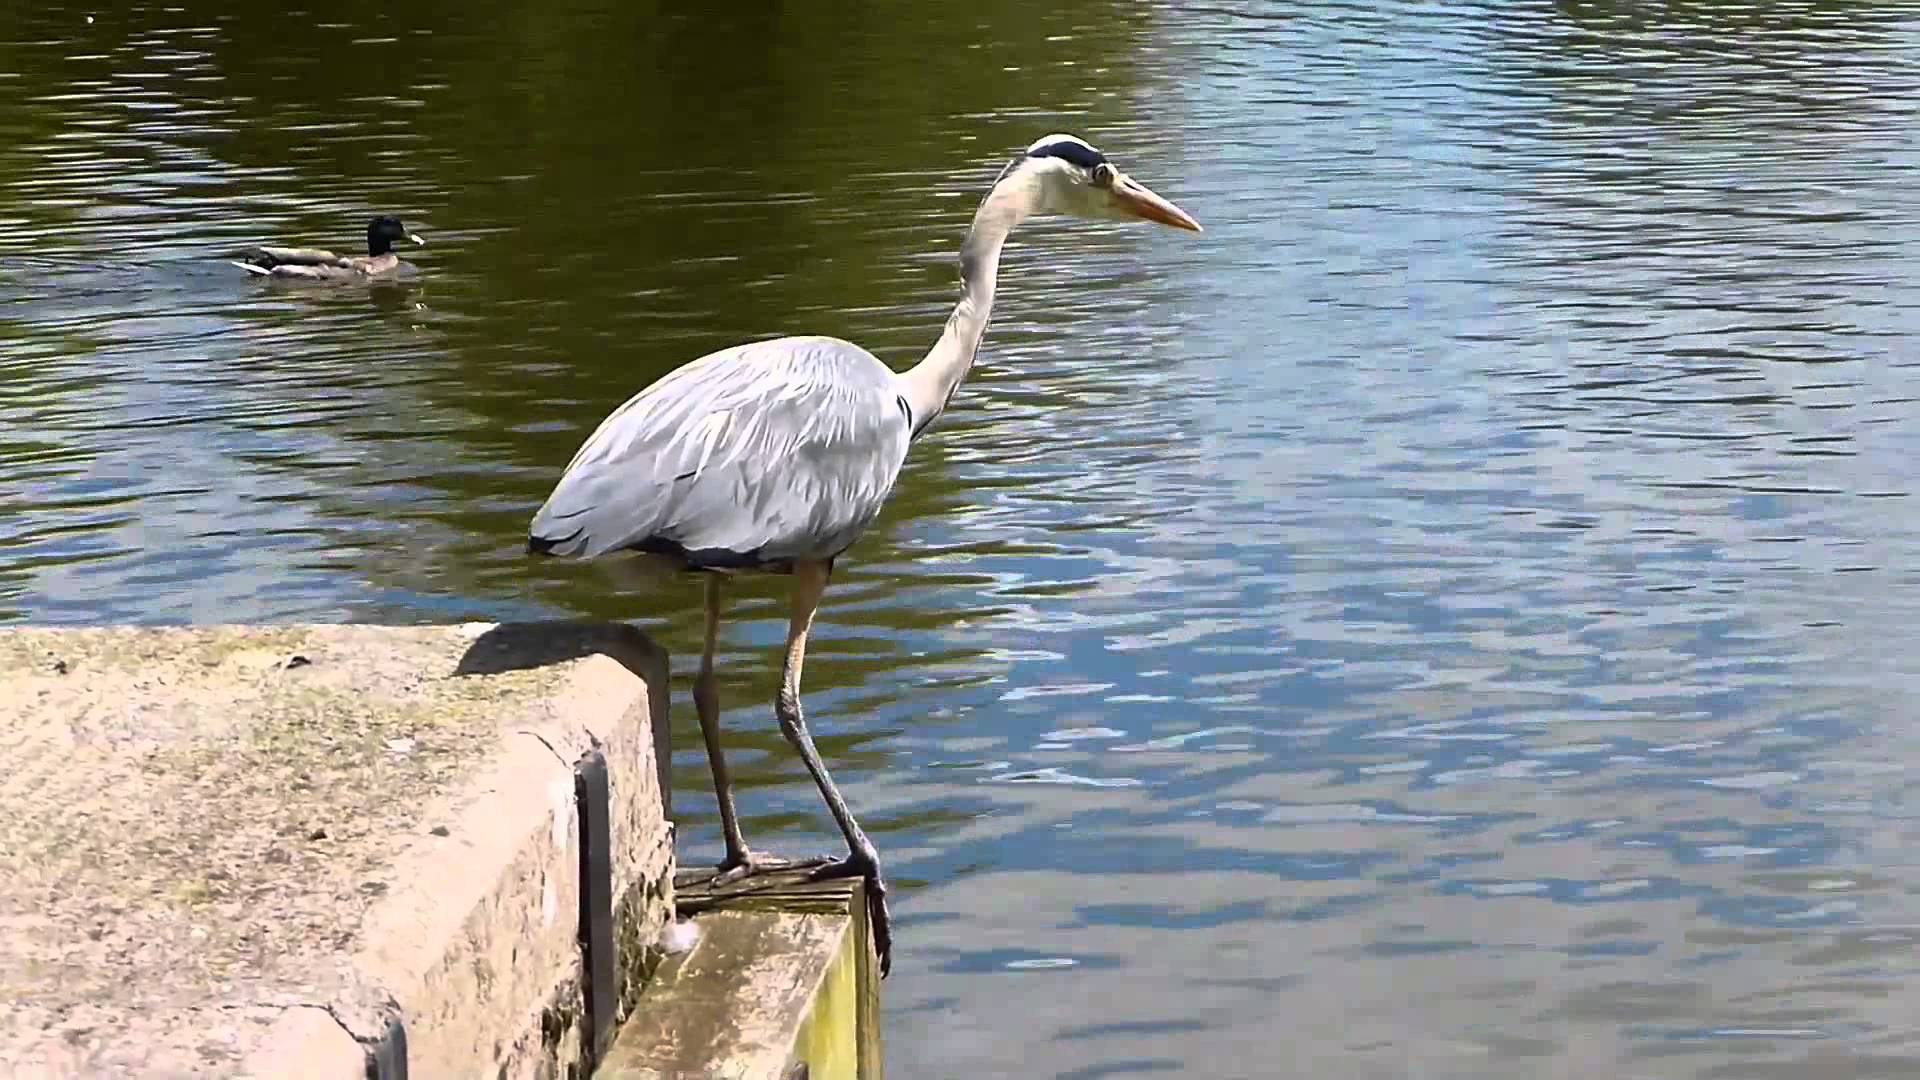 Grey Heron does a water takeoff - YouTube